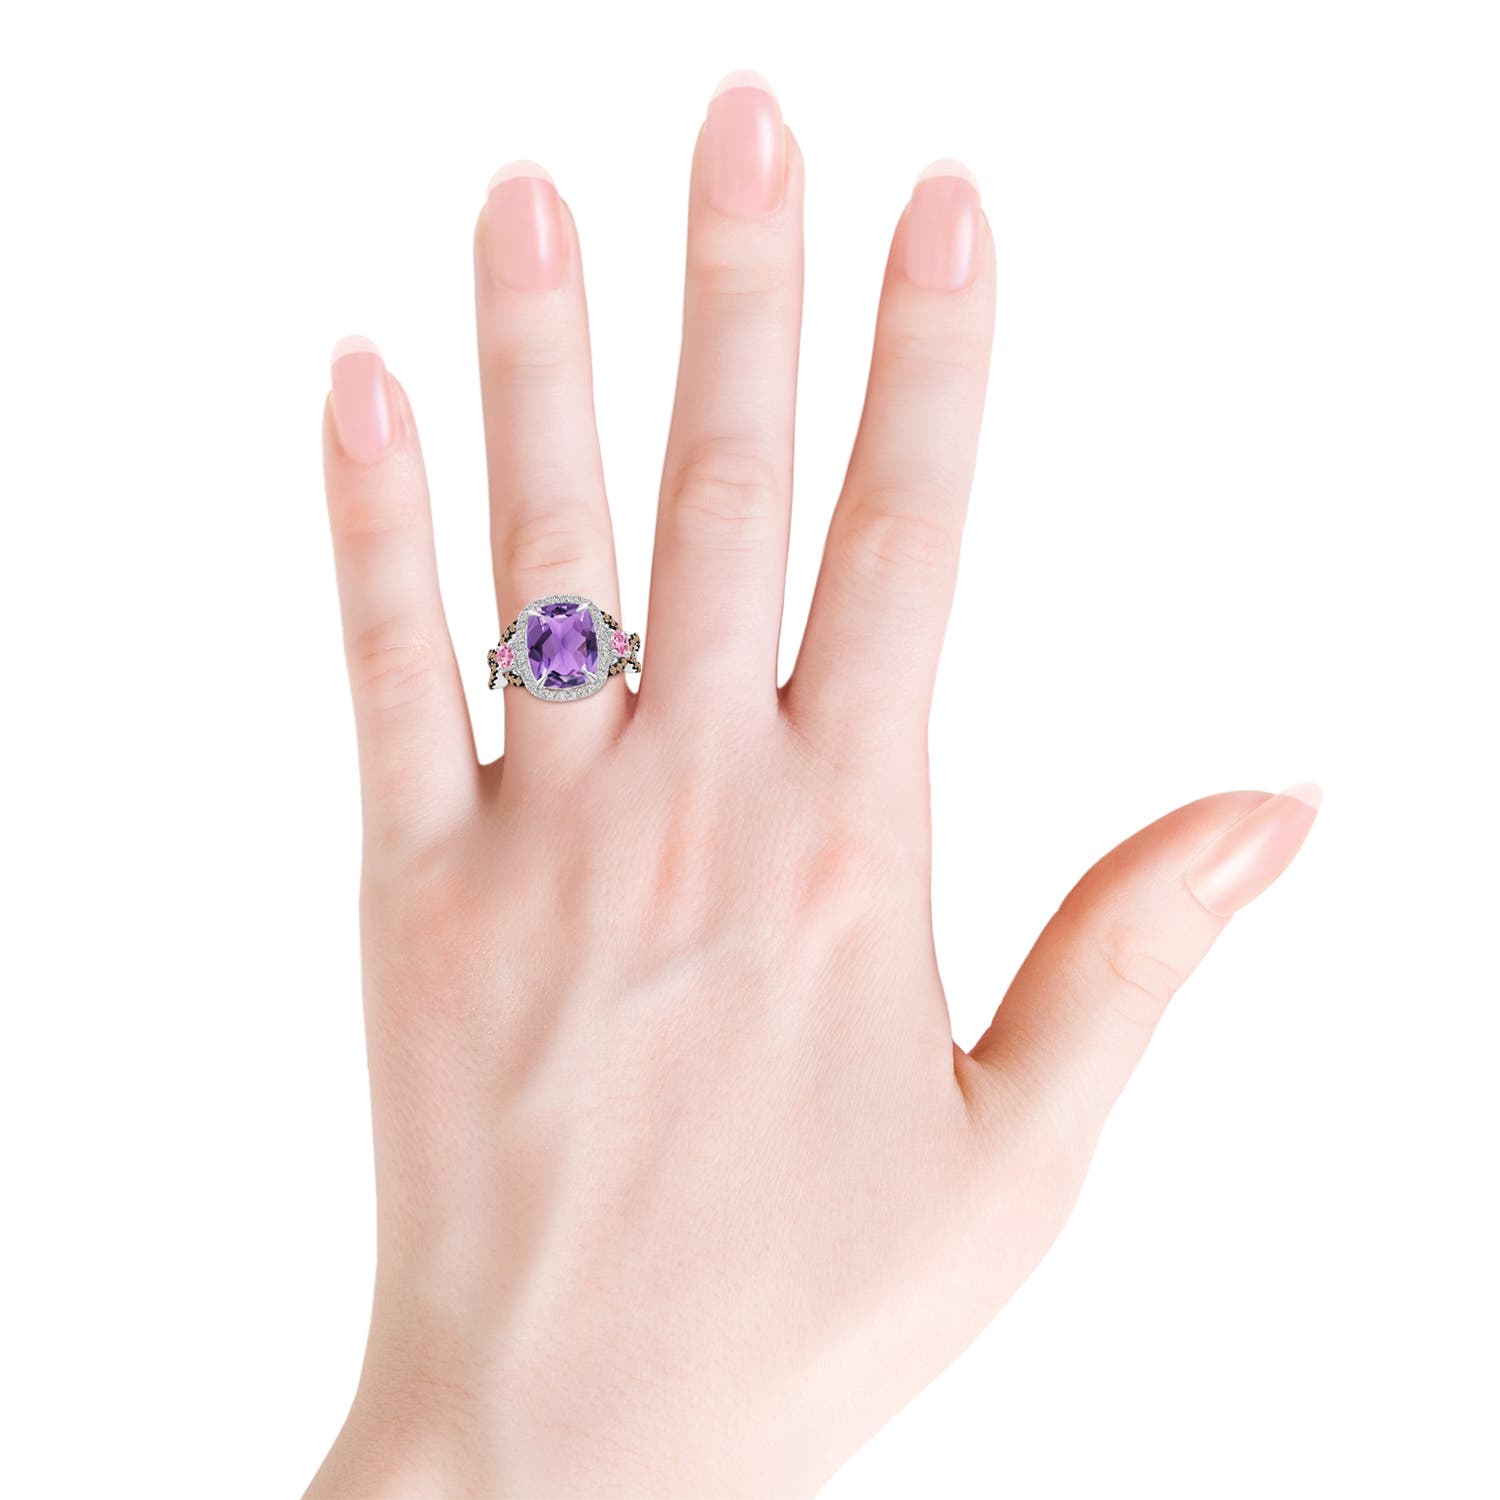 AA - Amethyst / 4.4 CT / 14 KT White Gold